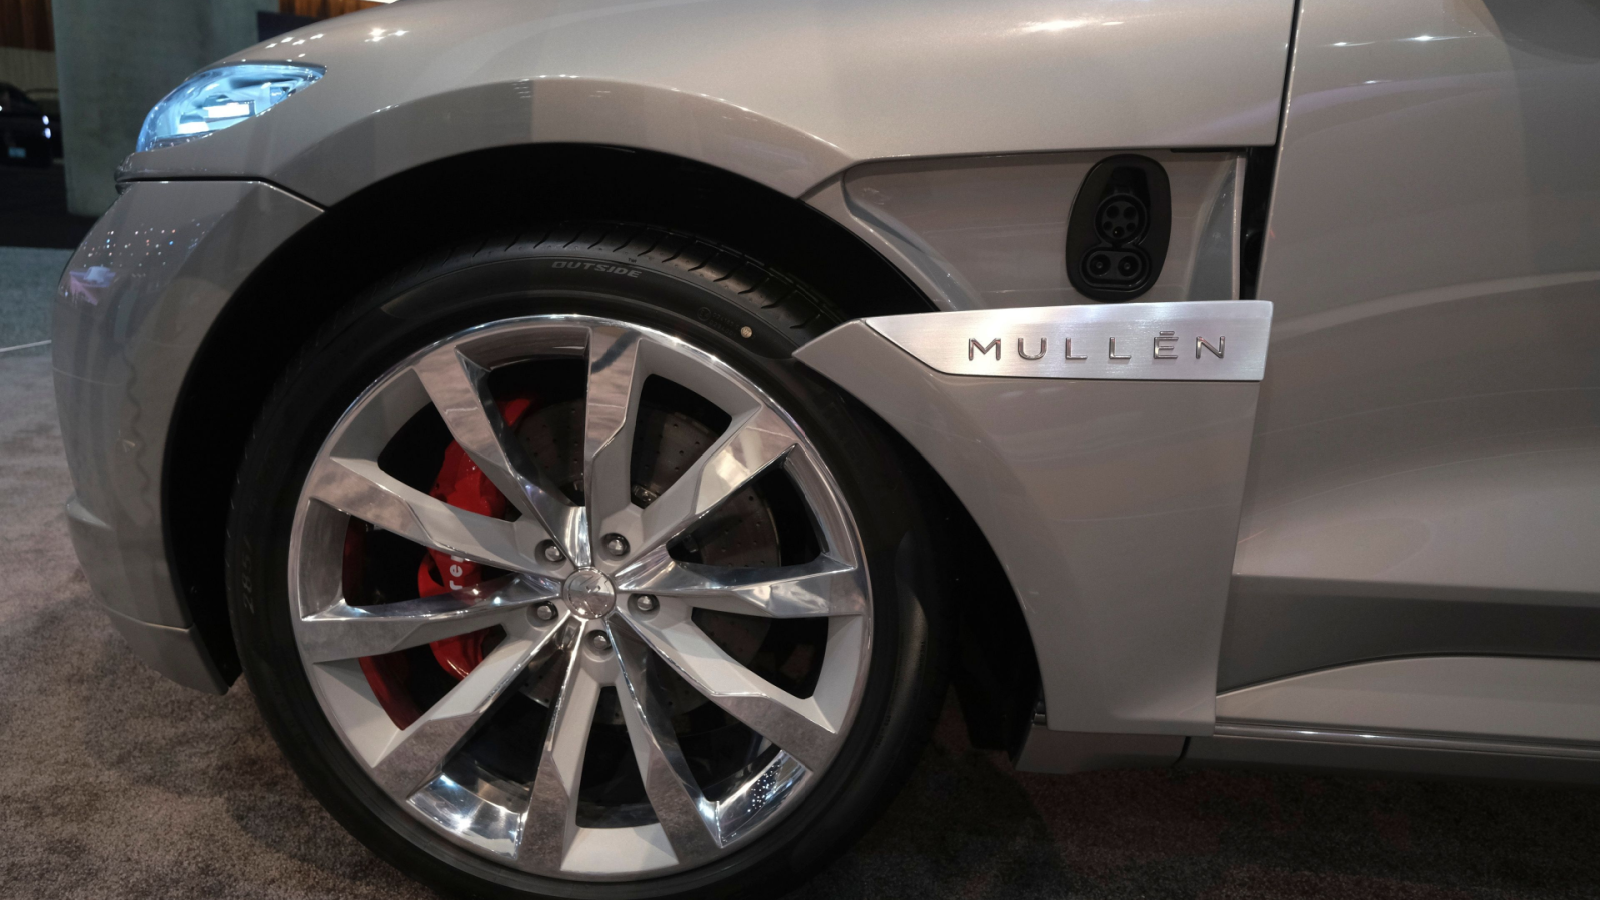 The Mullen (MULN) Five vehicle is displayed at the 2021 LA Auto Show media day in Los Angeles, November, 18, 2021.